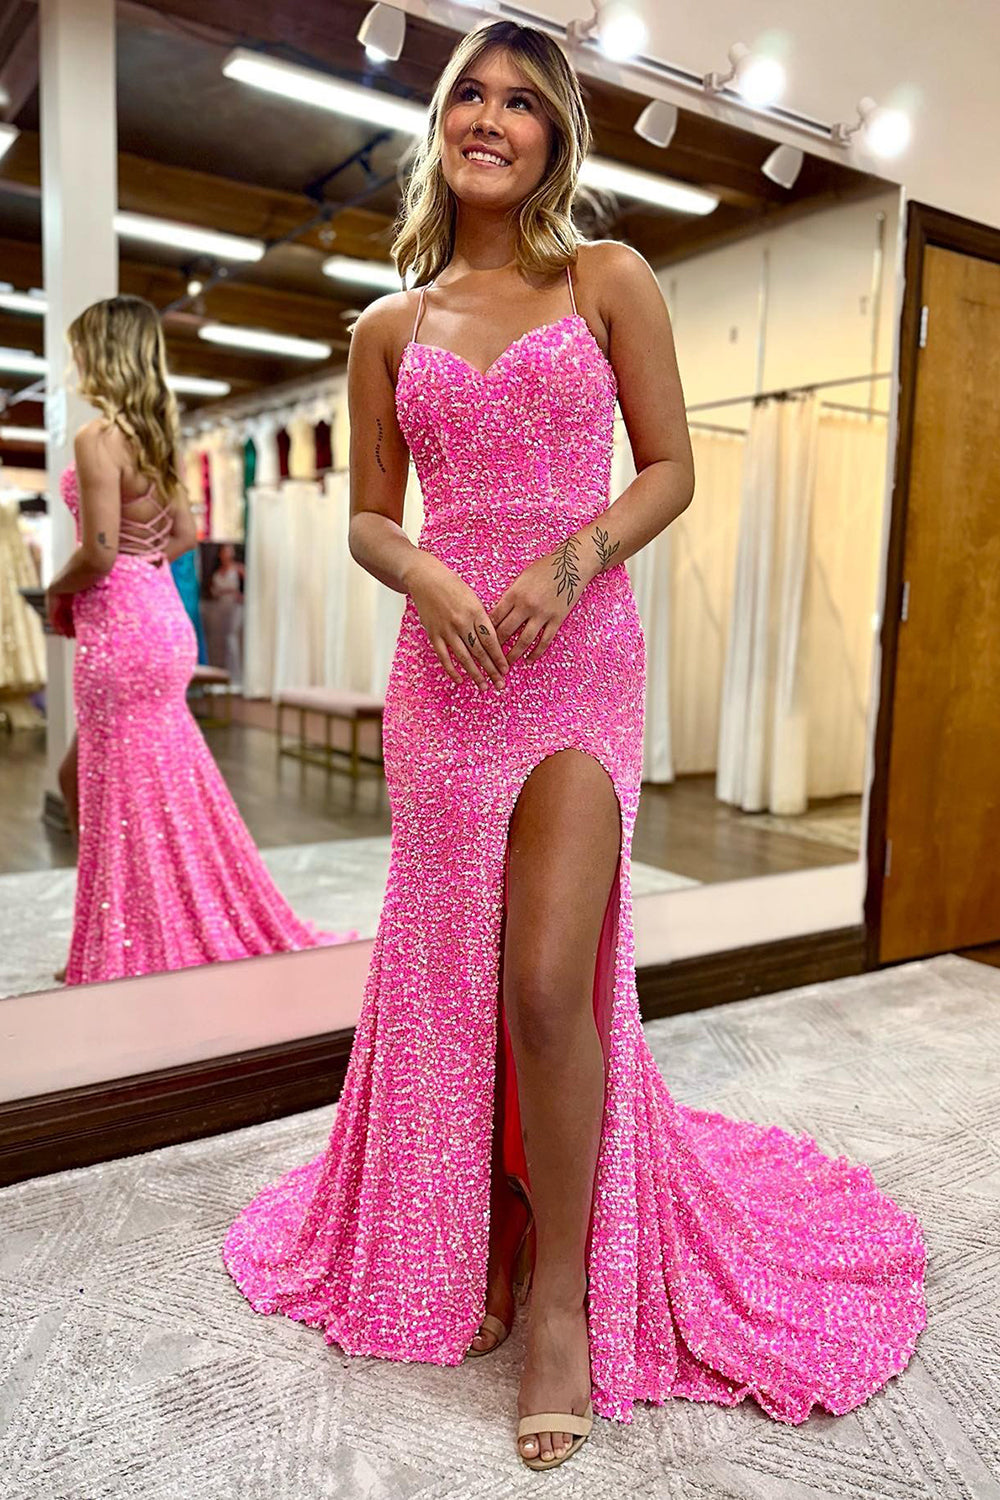 Homrain Women Sparkly Hot Pink Sequins Long Prom Dress with Slit Mermaid Spaghetti Straps Party Dress